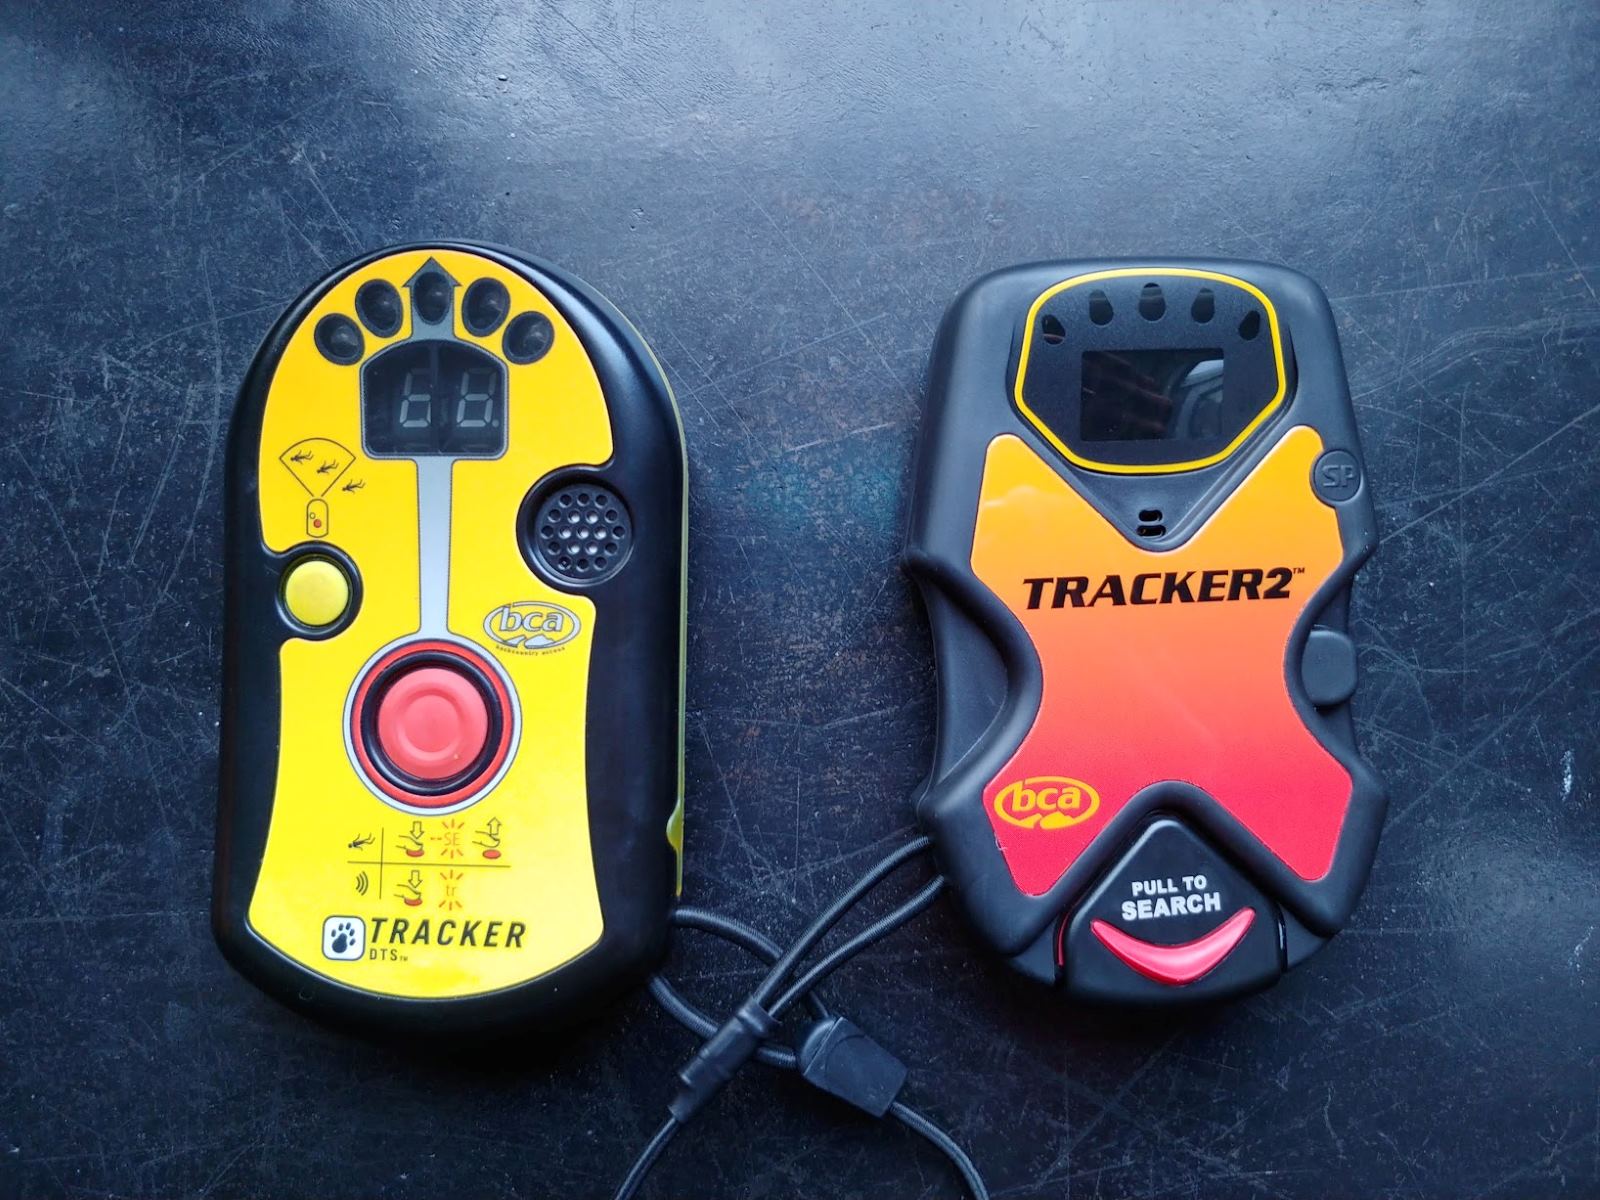 Avalanche Transceiver Review: Essential Safety Gear for Outdoor Enthusiasts